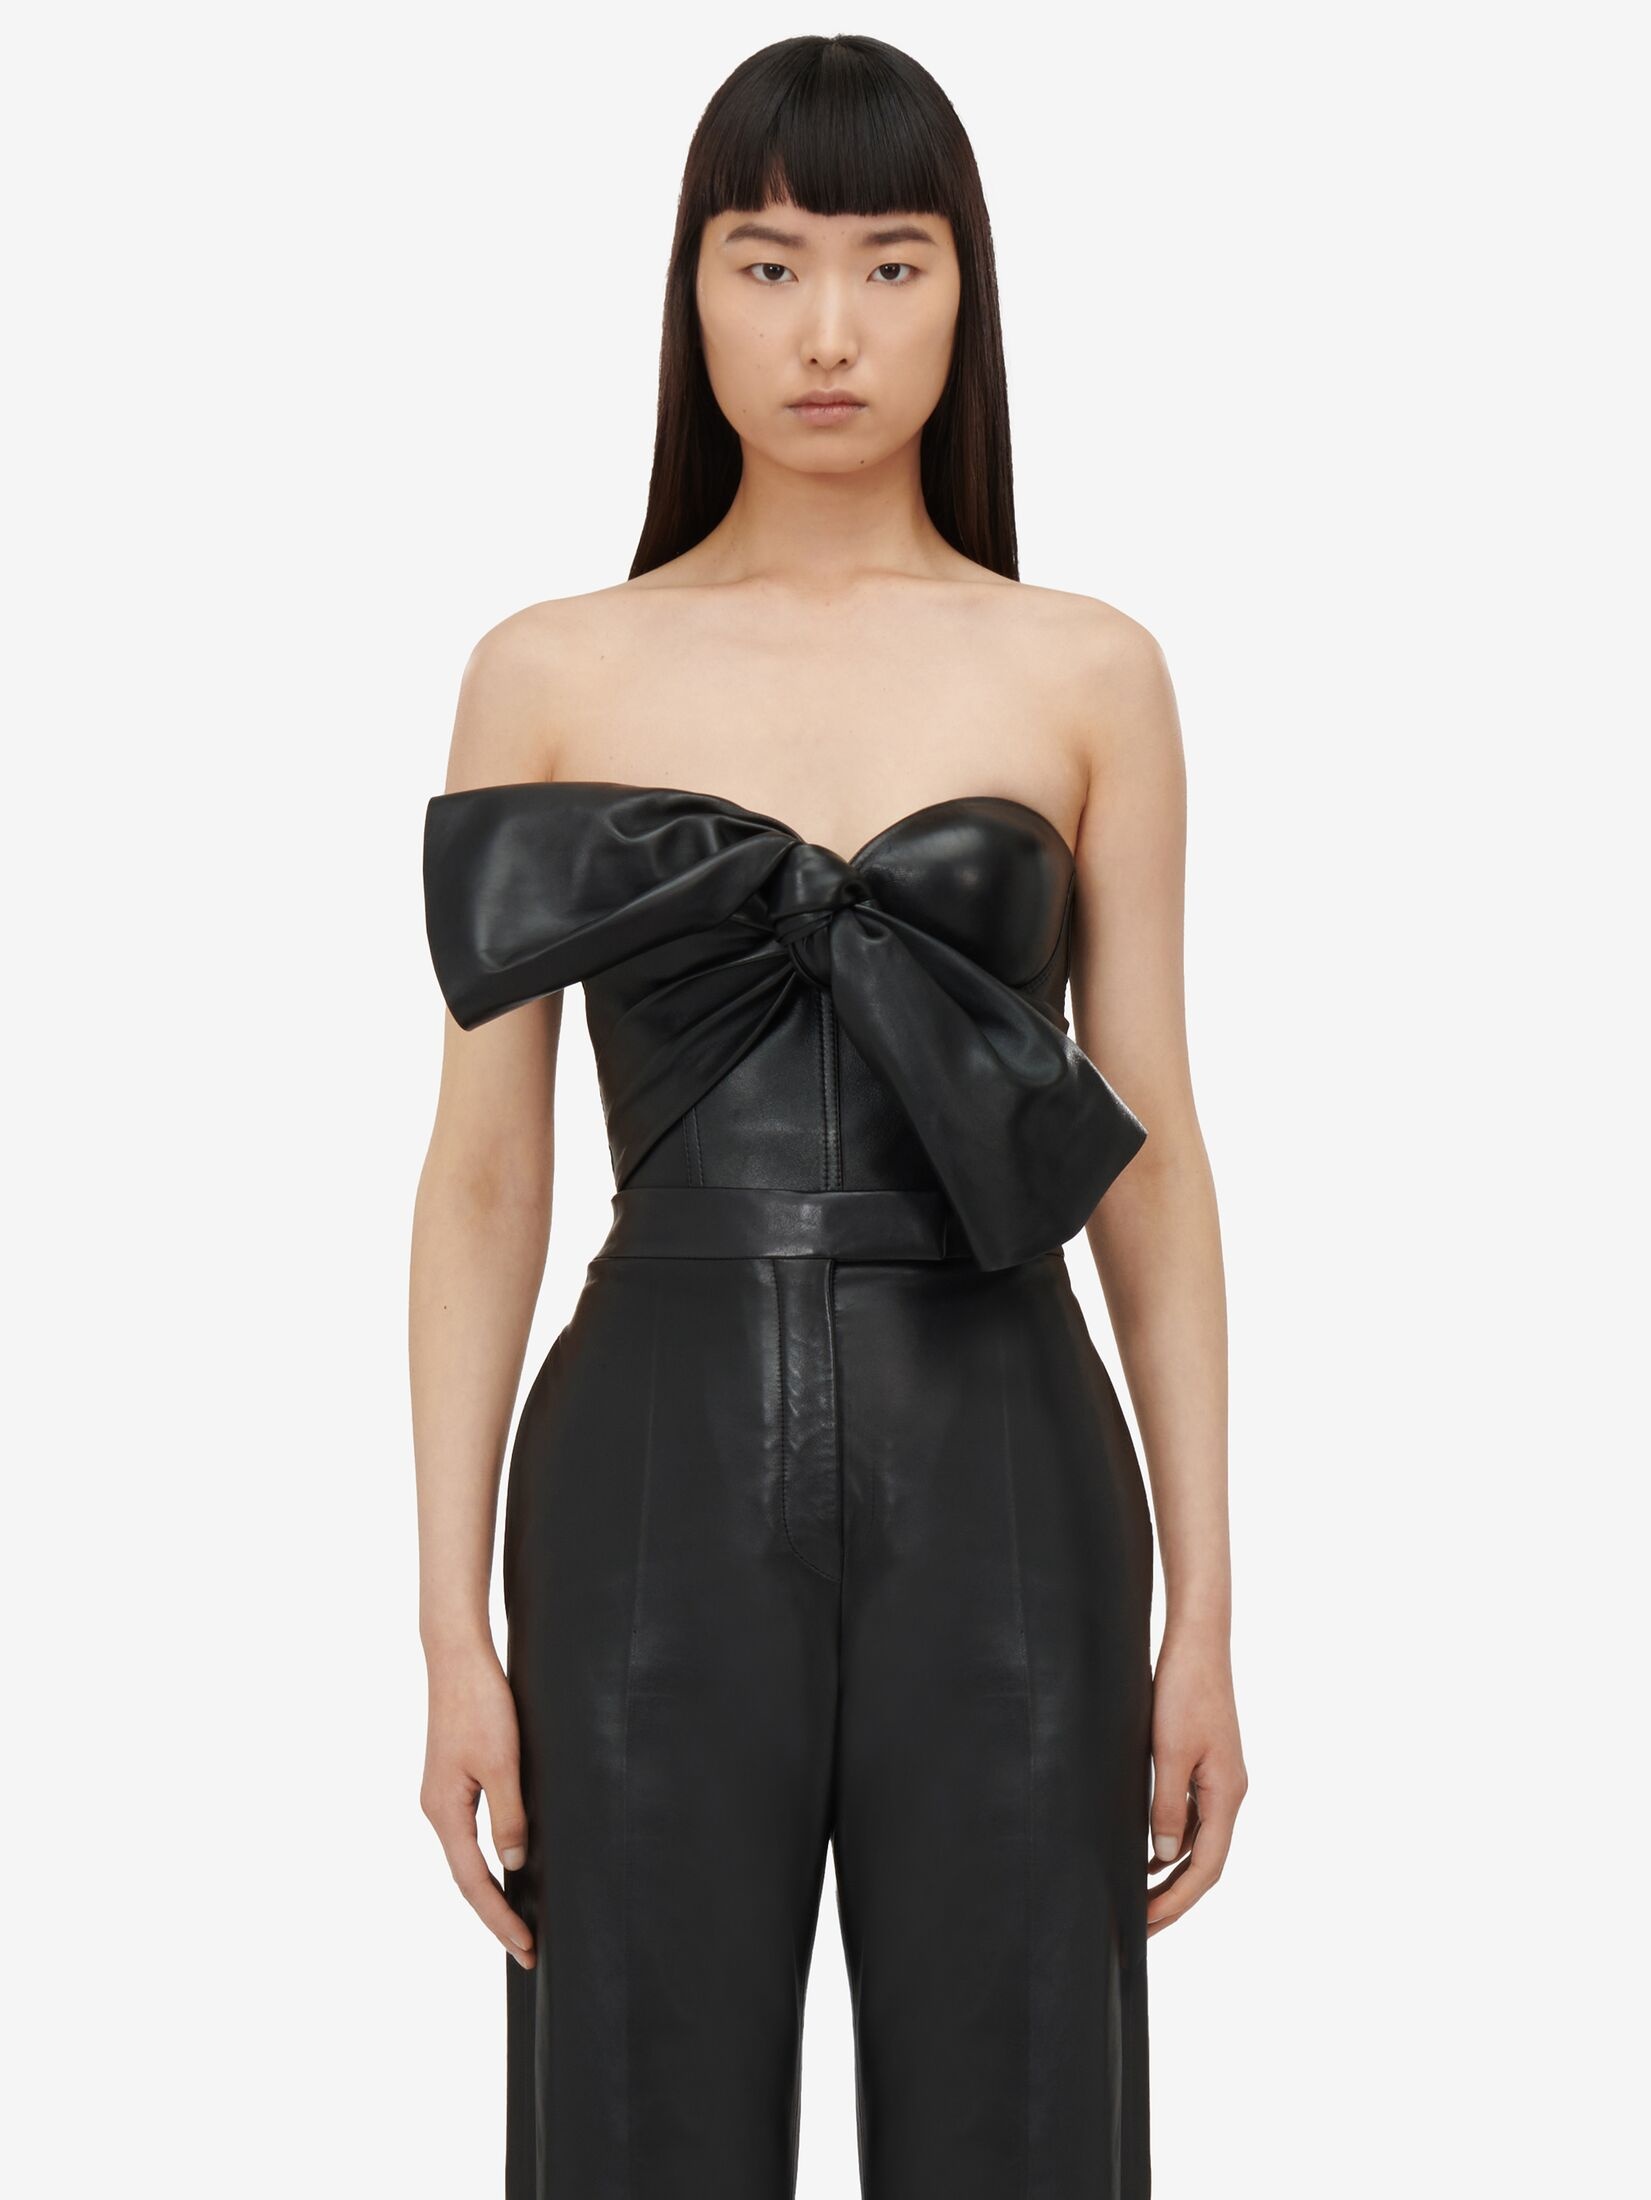 Women's Knotted Bow Leather Corset in Black - 5